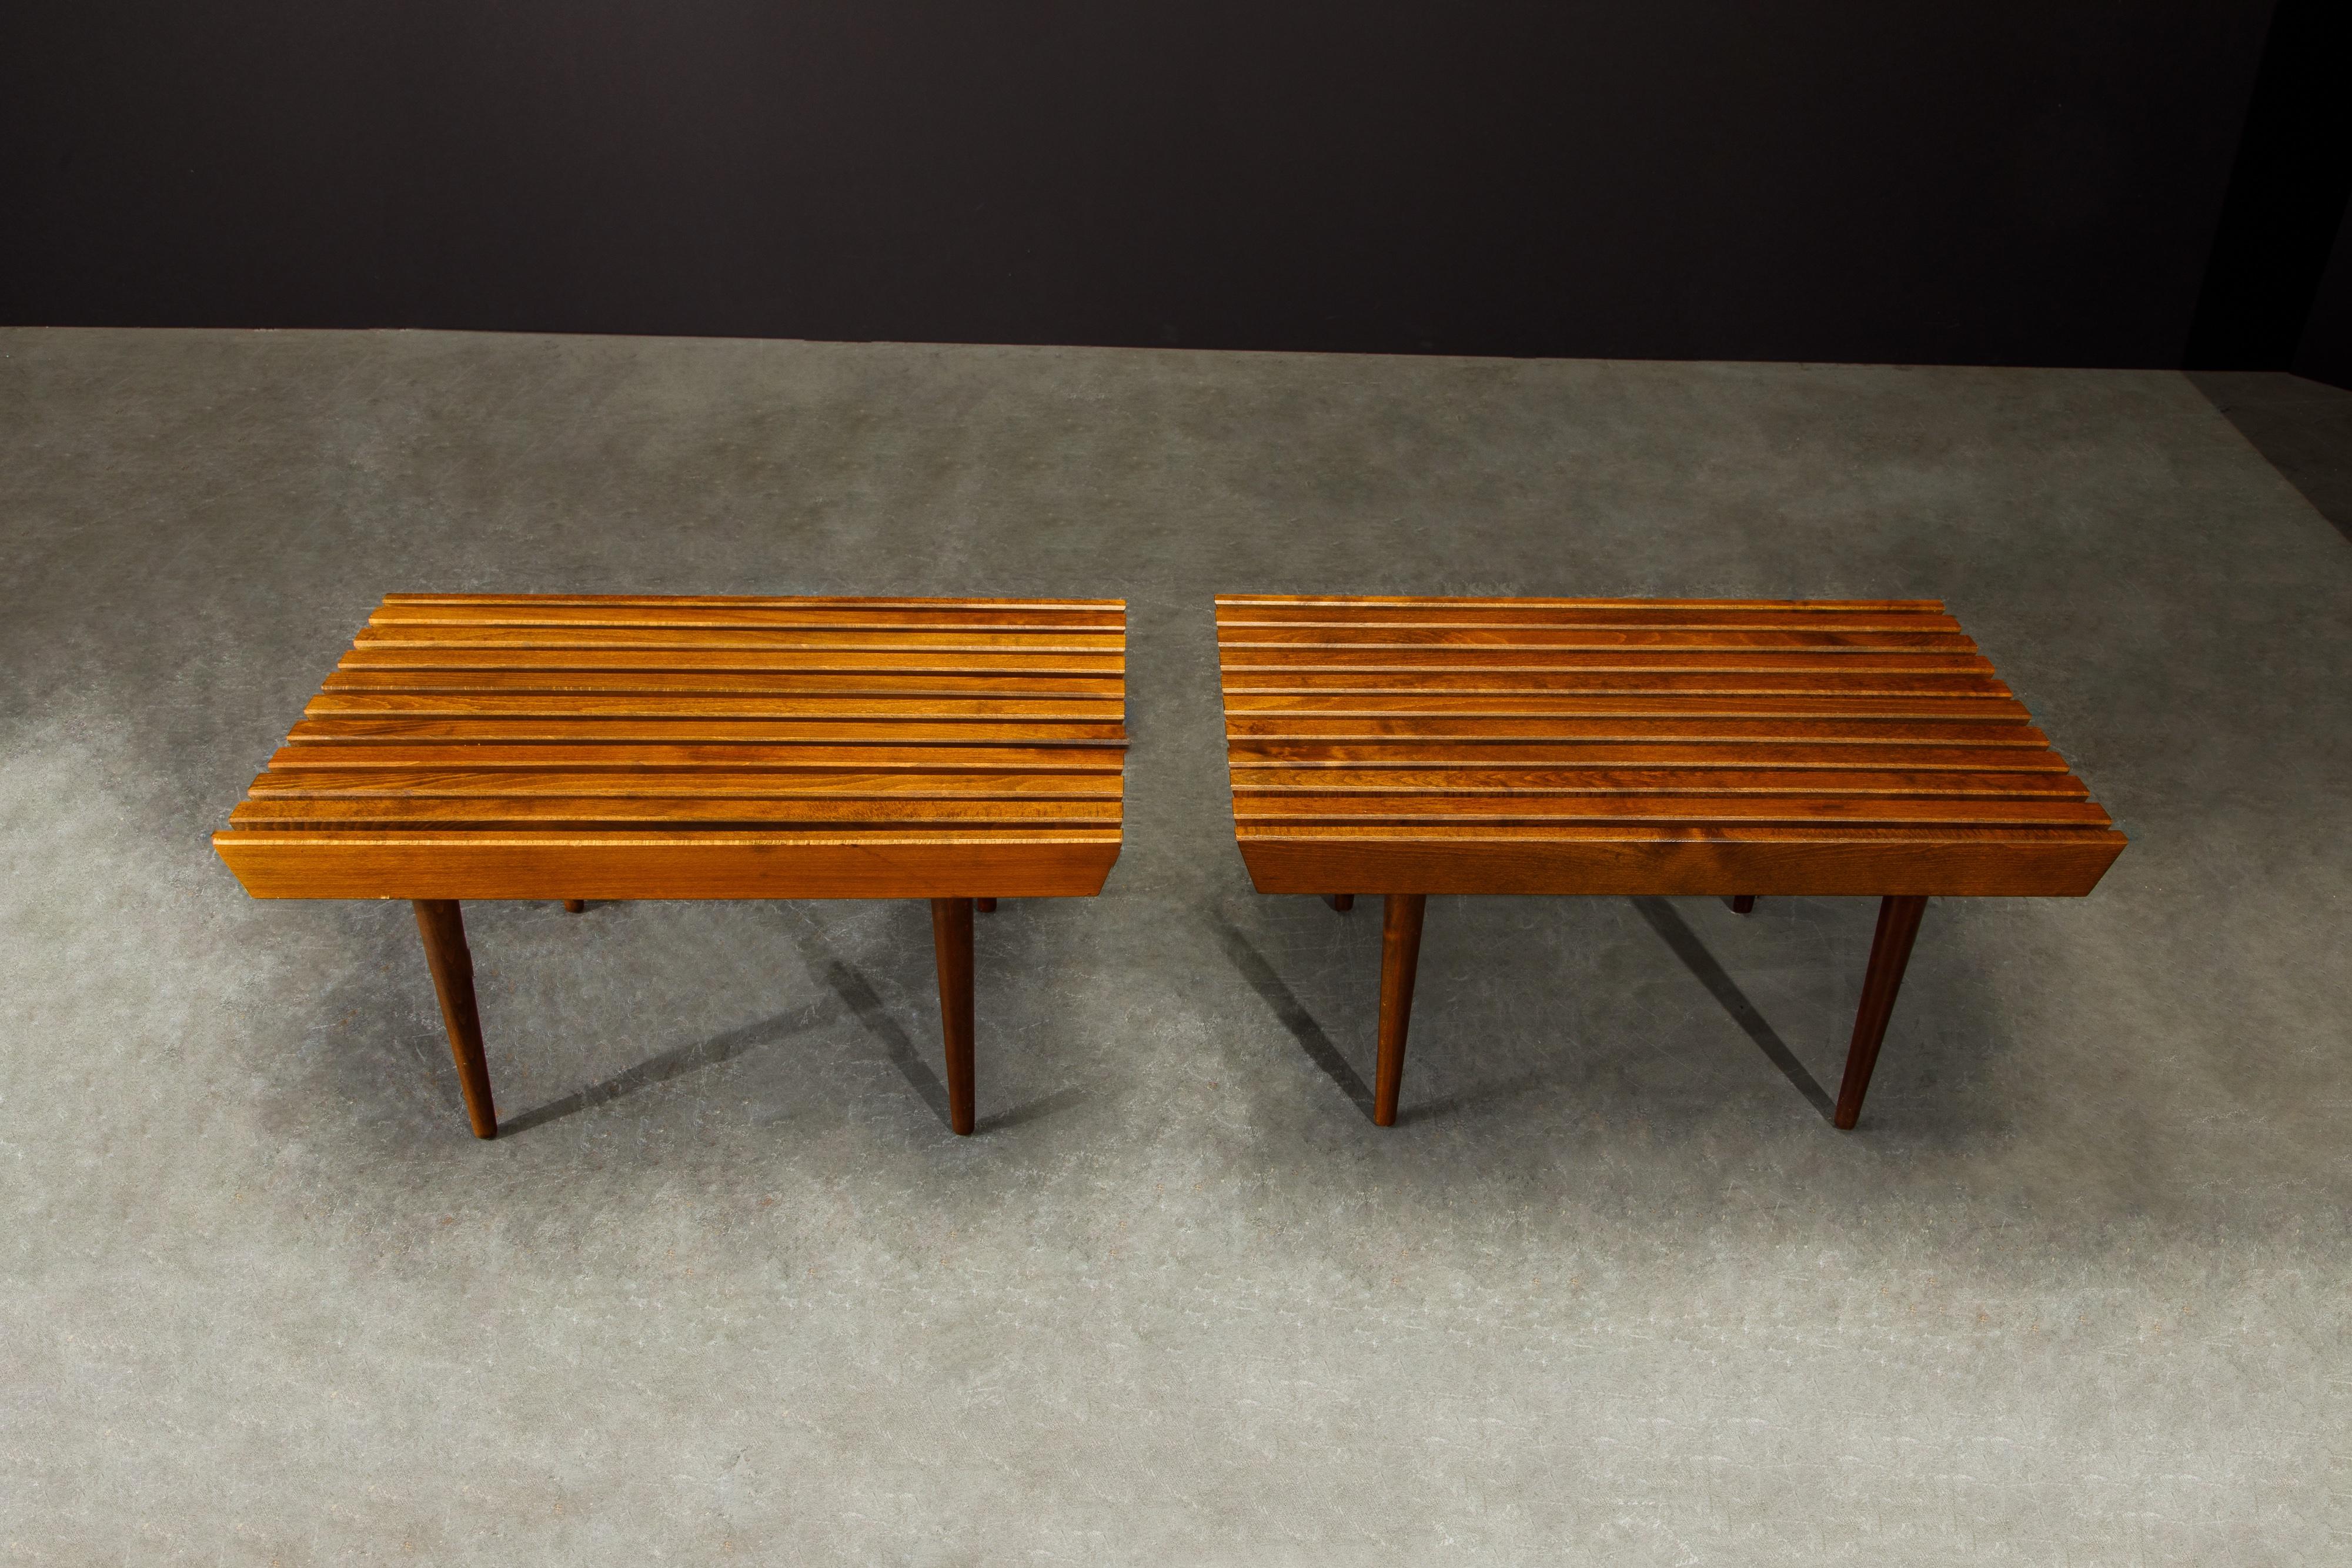 Mid-20th Century Pair of Refinished George Nelson Style Slatted Wood Bench or Table, circa 1960